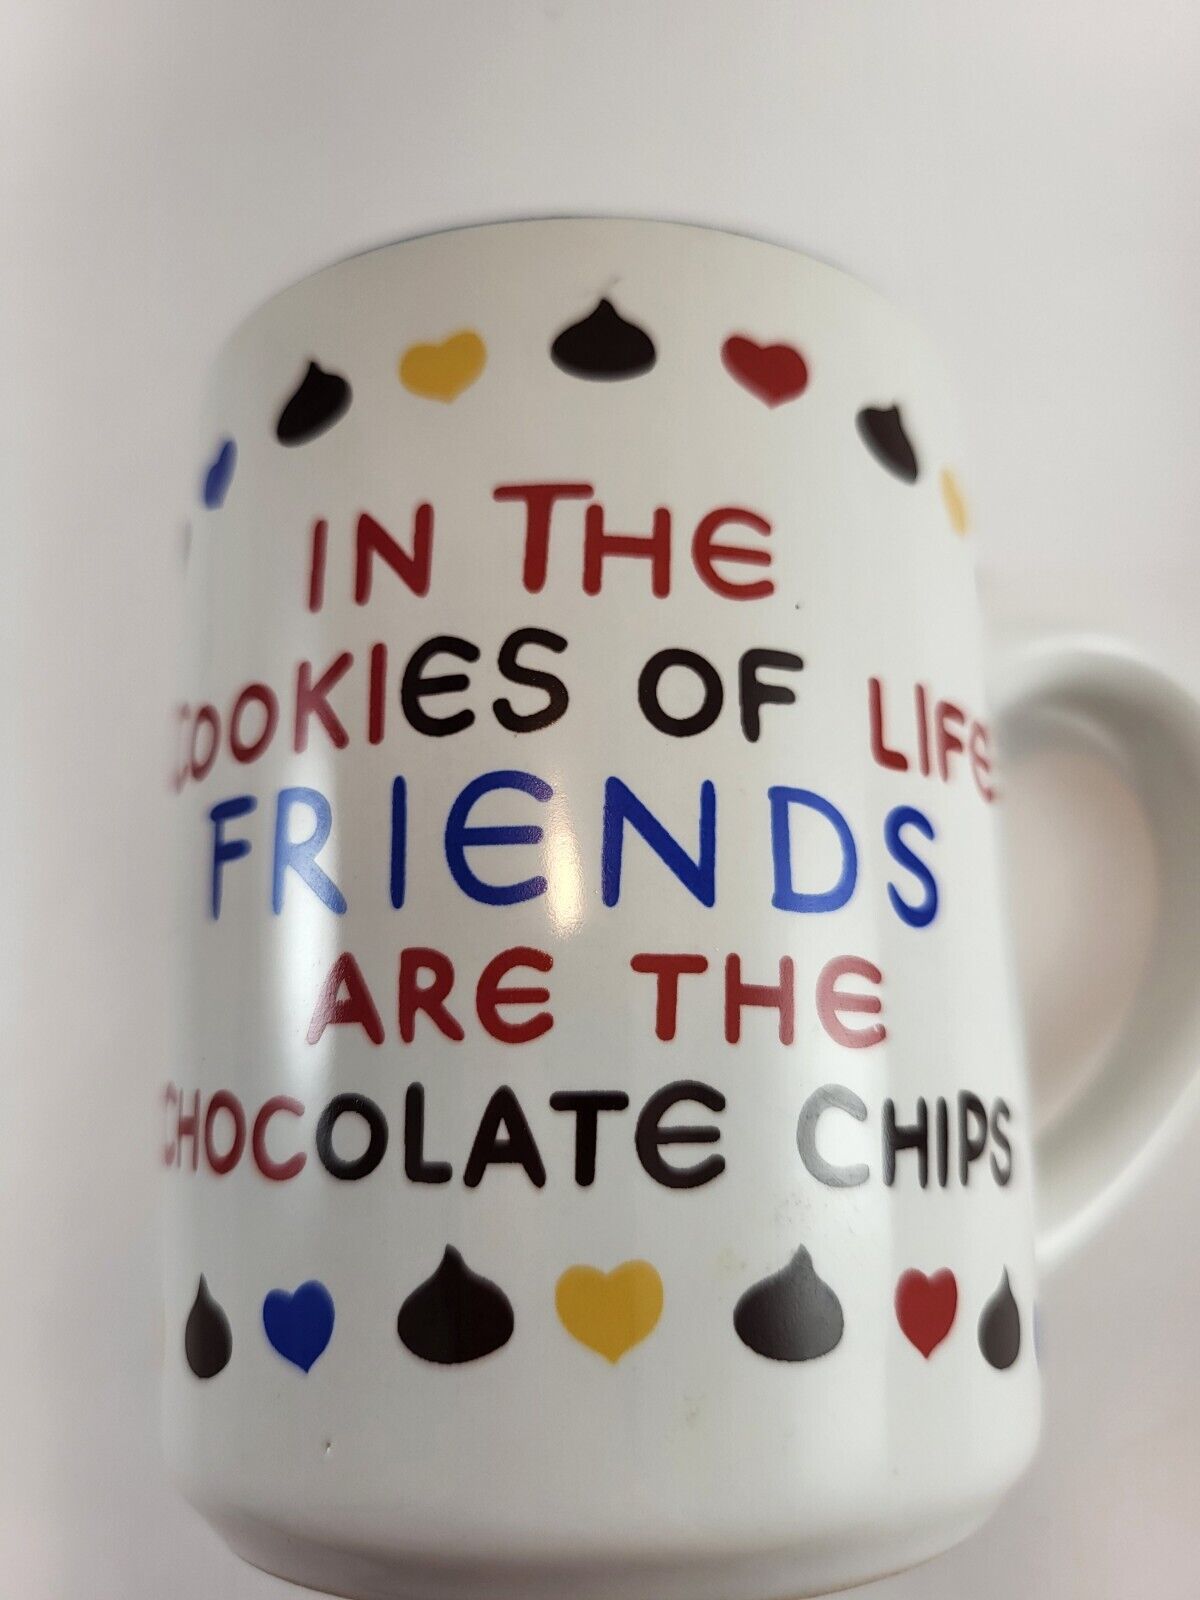 In The Cookies Of Life Friends Are Chocolate Chips Mug 1995 Bandwagon White 12oz